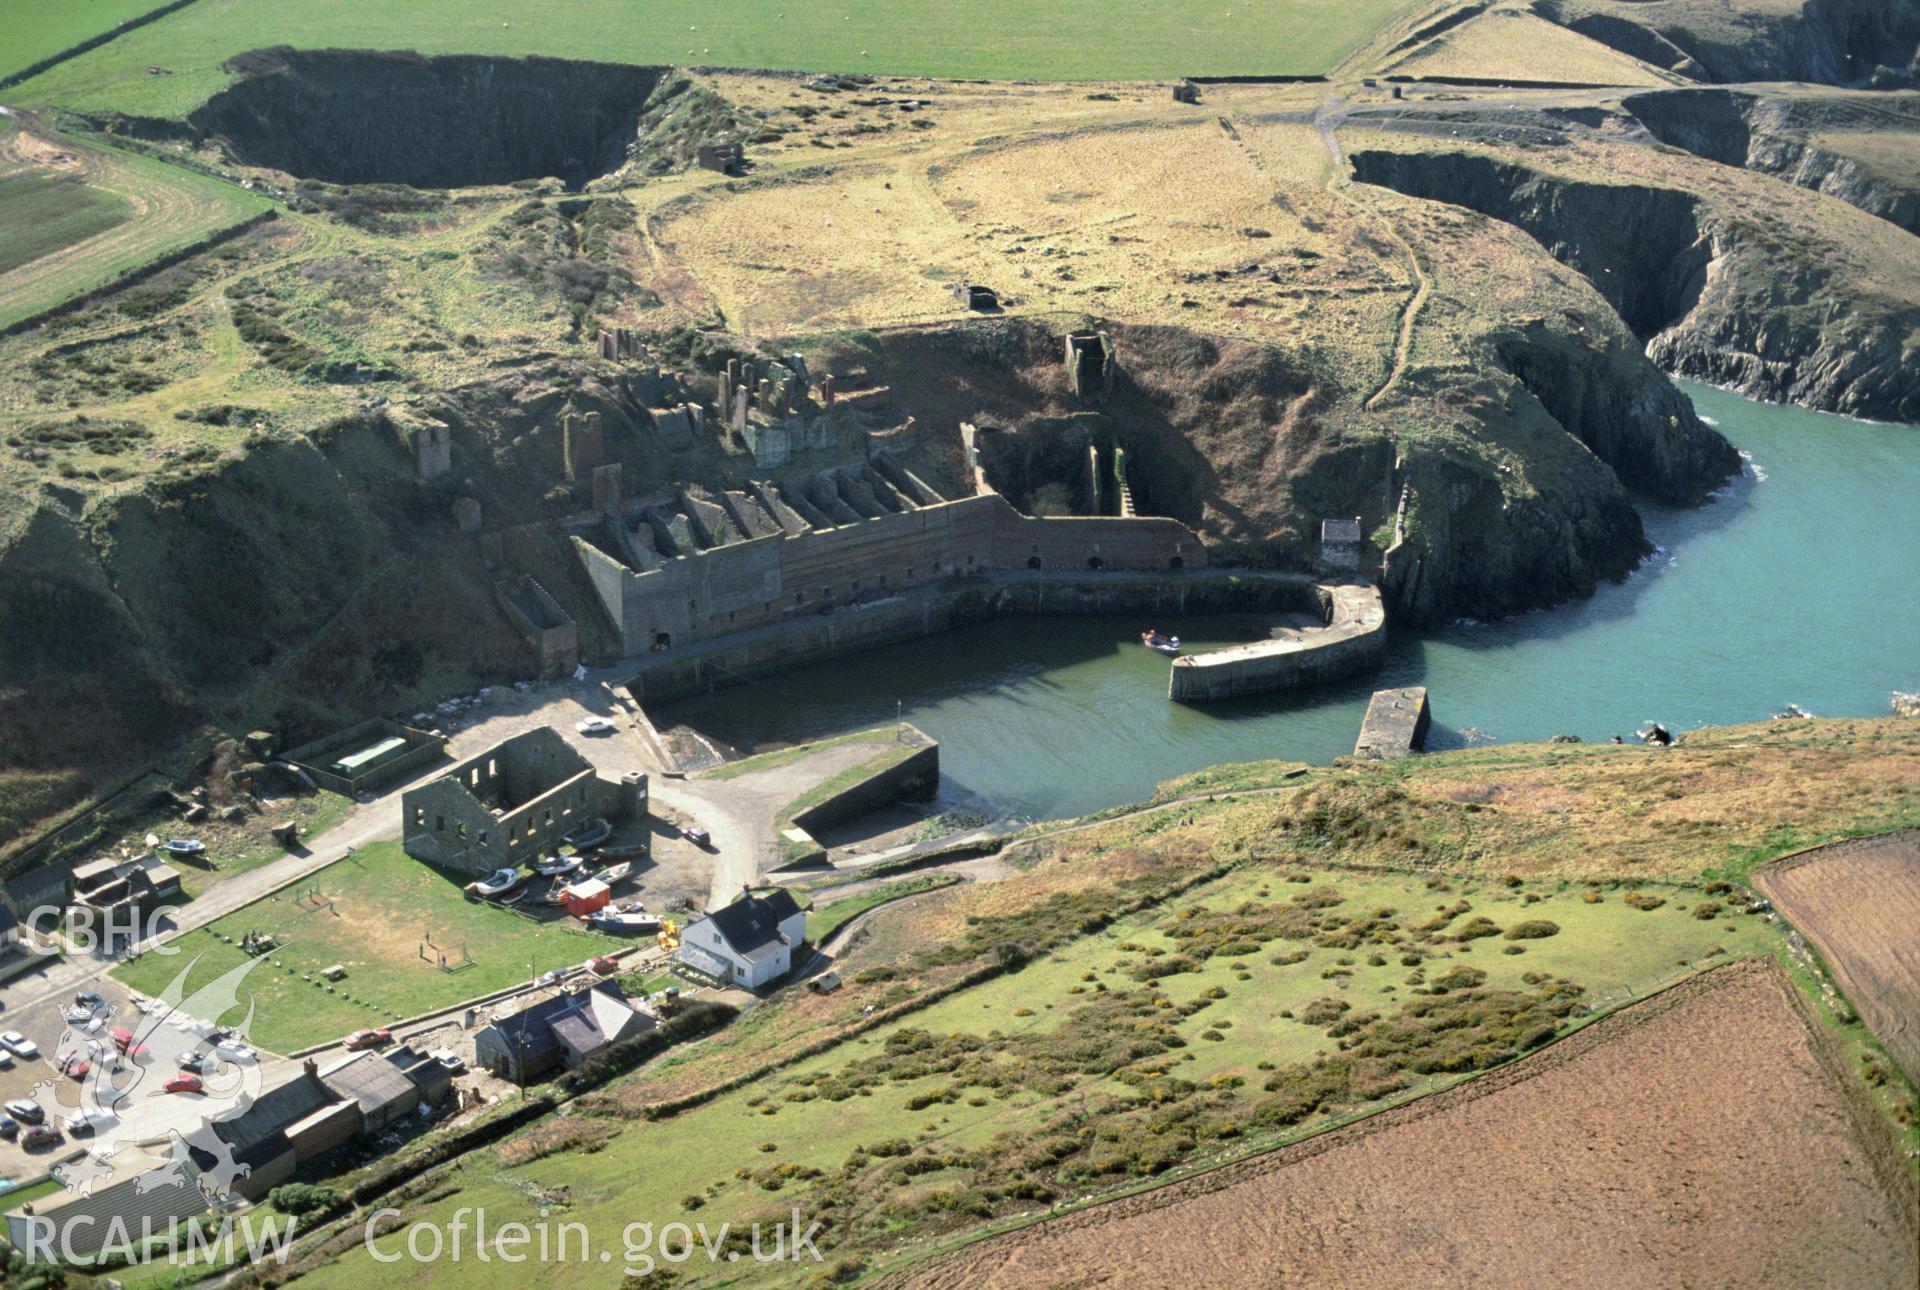 Slide of RCAHMW colour oblique aerial photograph of Porthgain Harbour and Brickworks, taken by C.R. Musson, 24/3/1991.